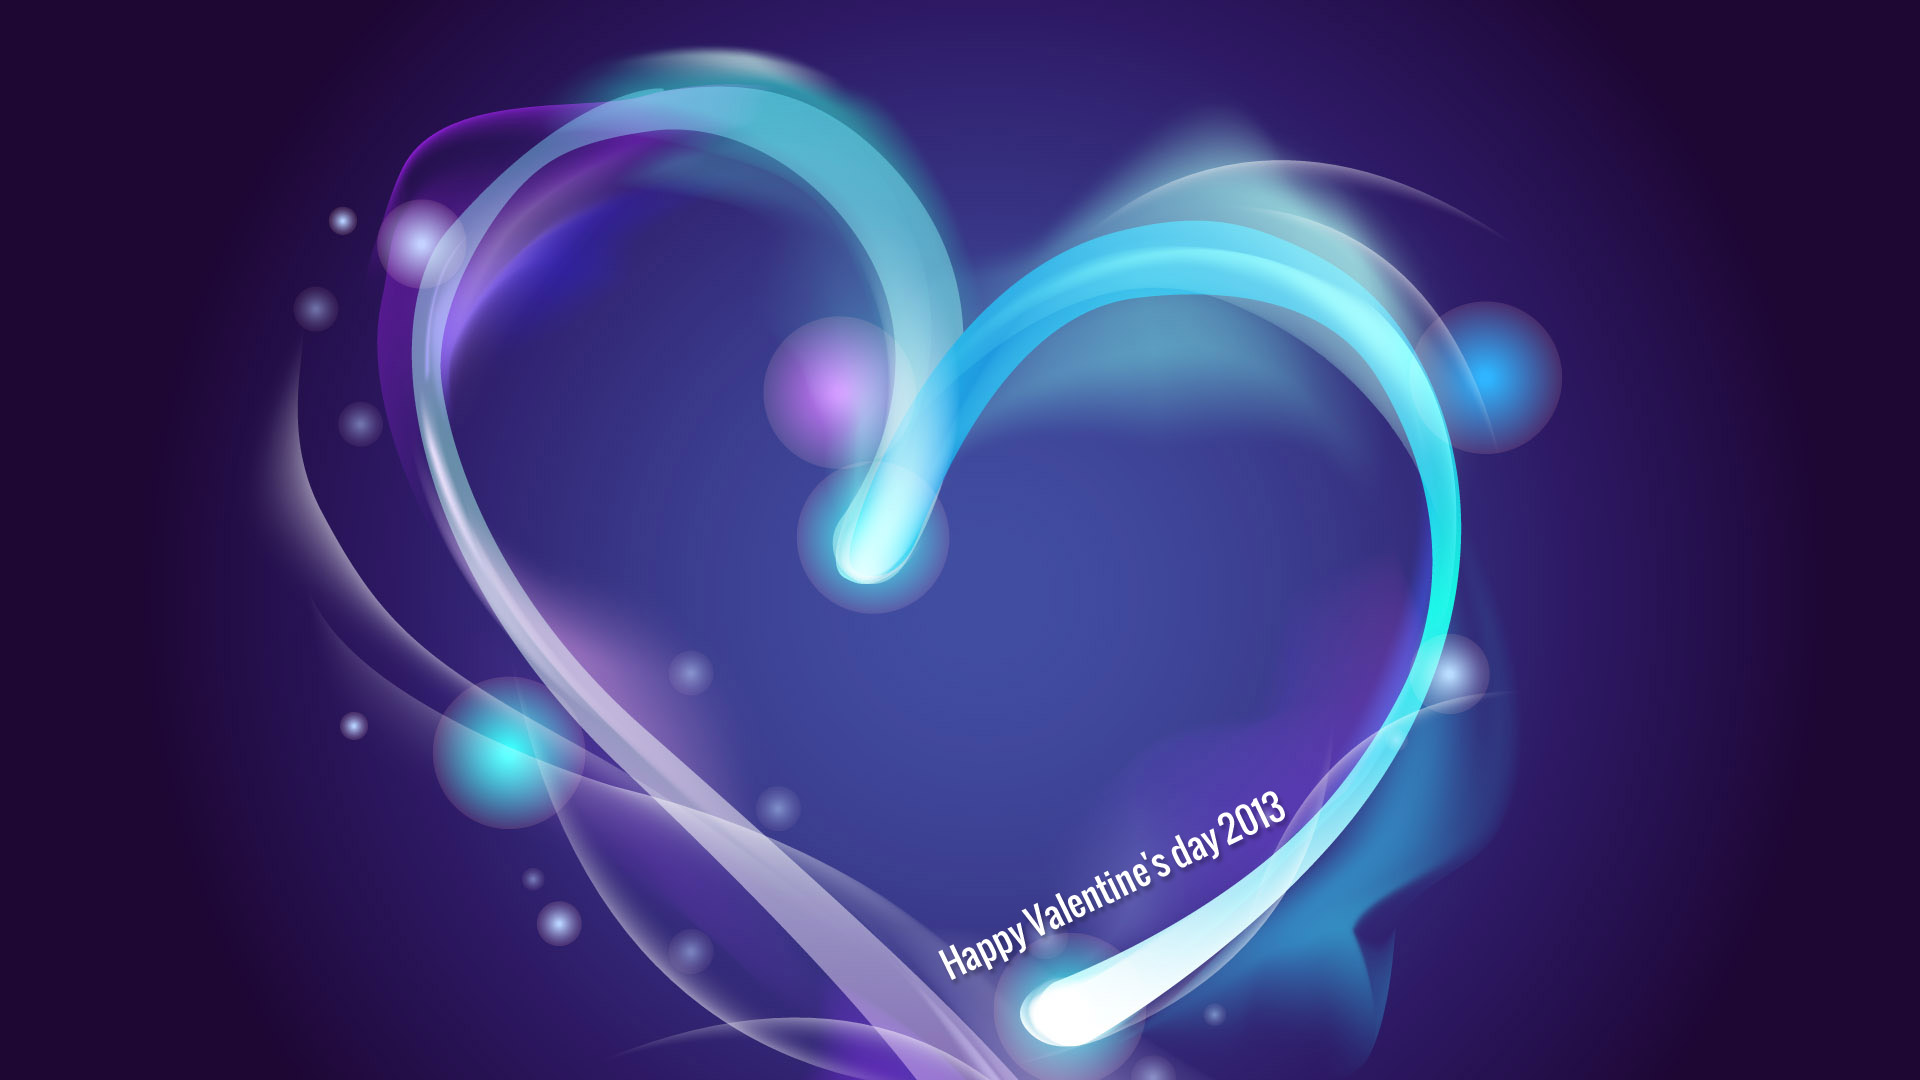 Wallpaper Valentines Day Heart Abstract Purple - Purple And Blue Heart - HD Wallpaper 